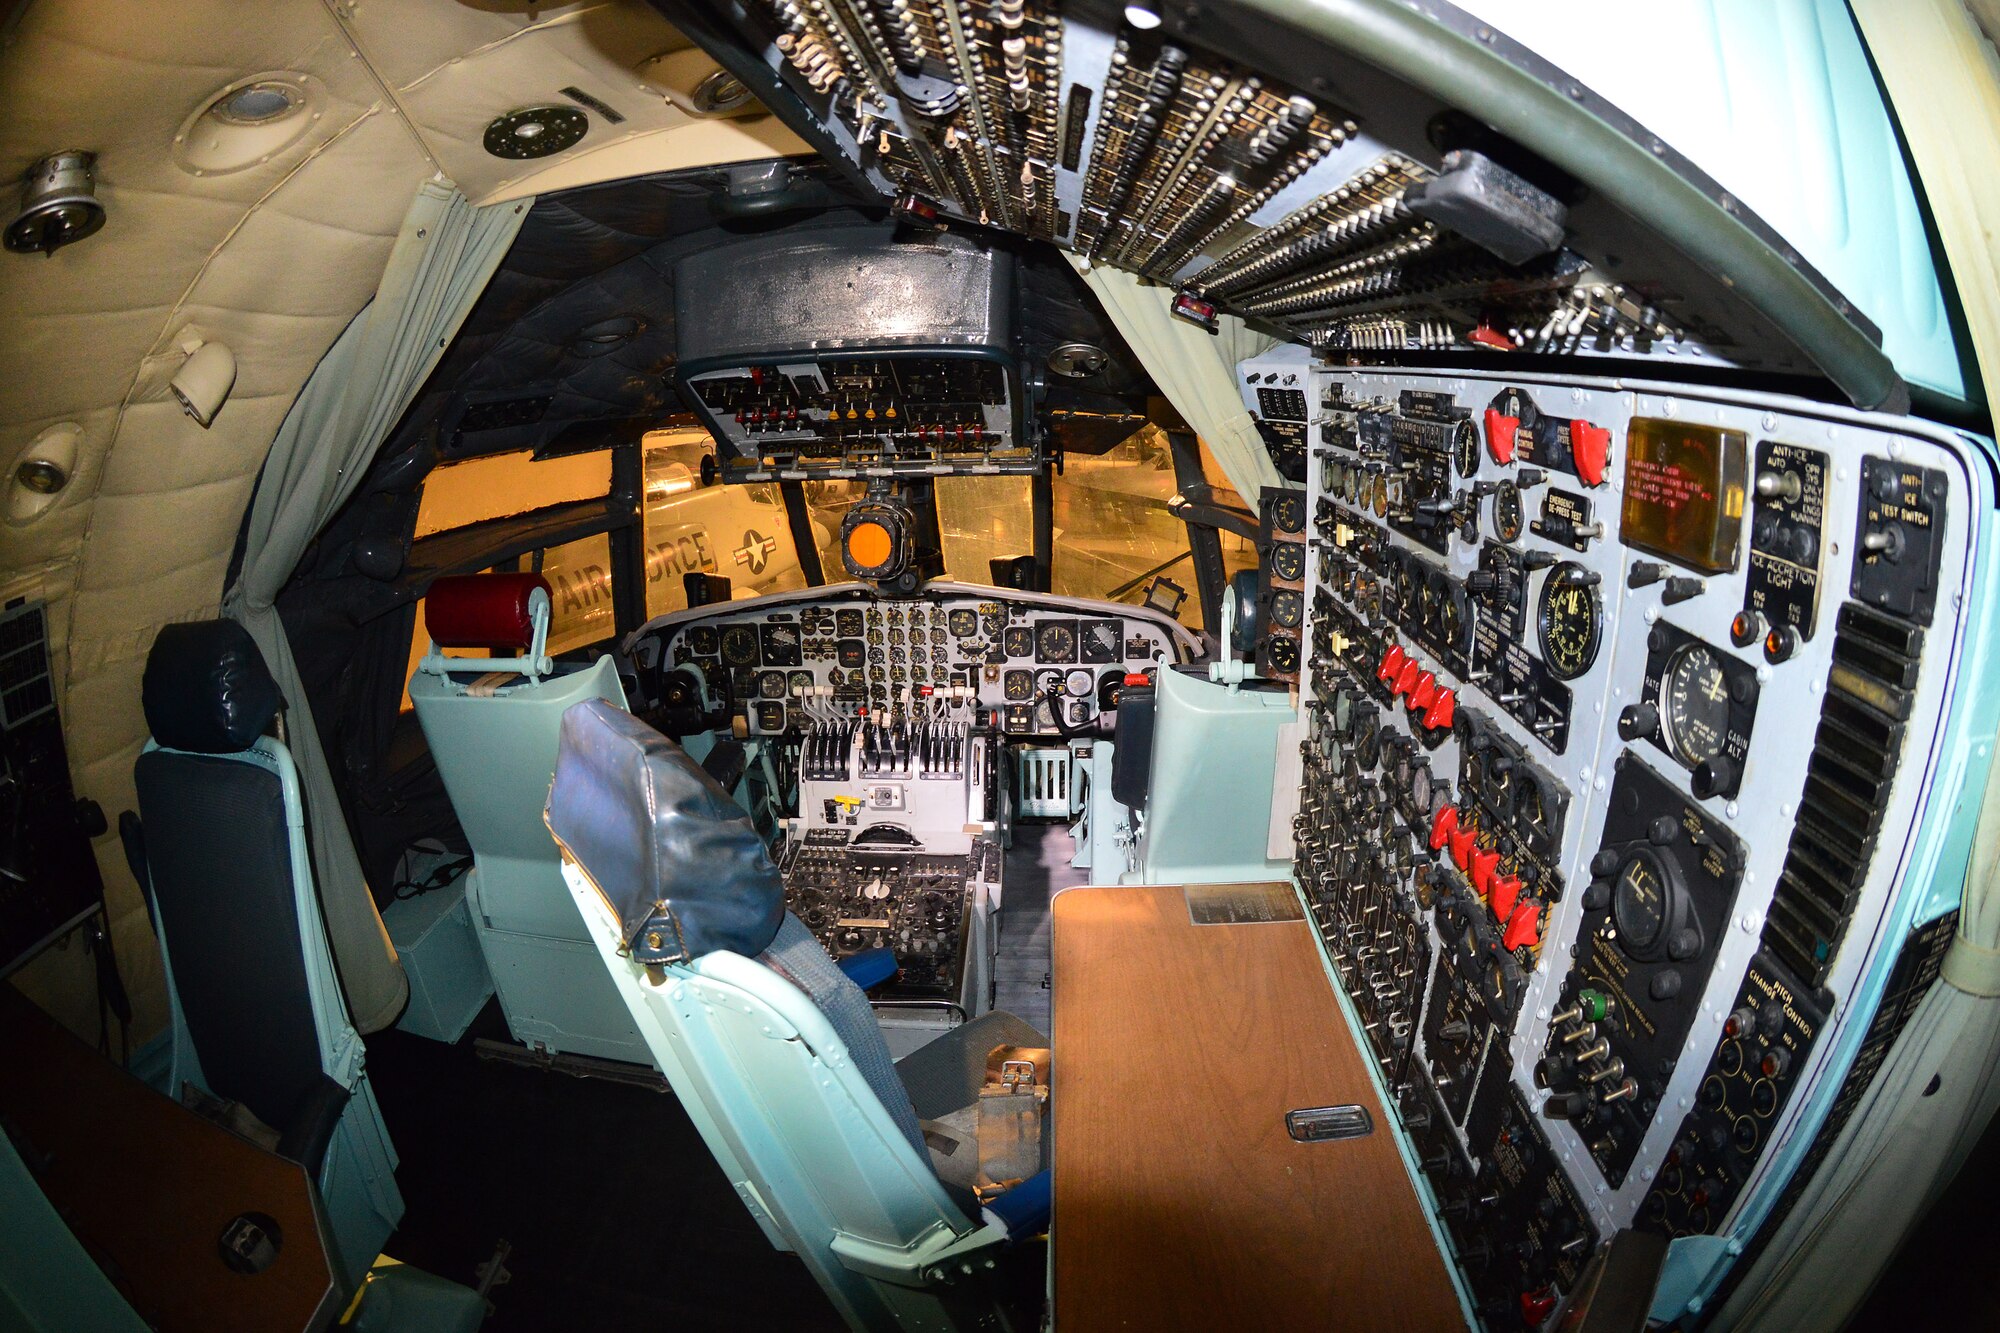 An image of the inside of a large military aircraft from over 50 years ago.